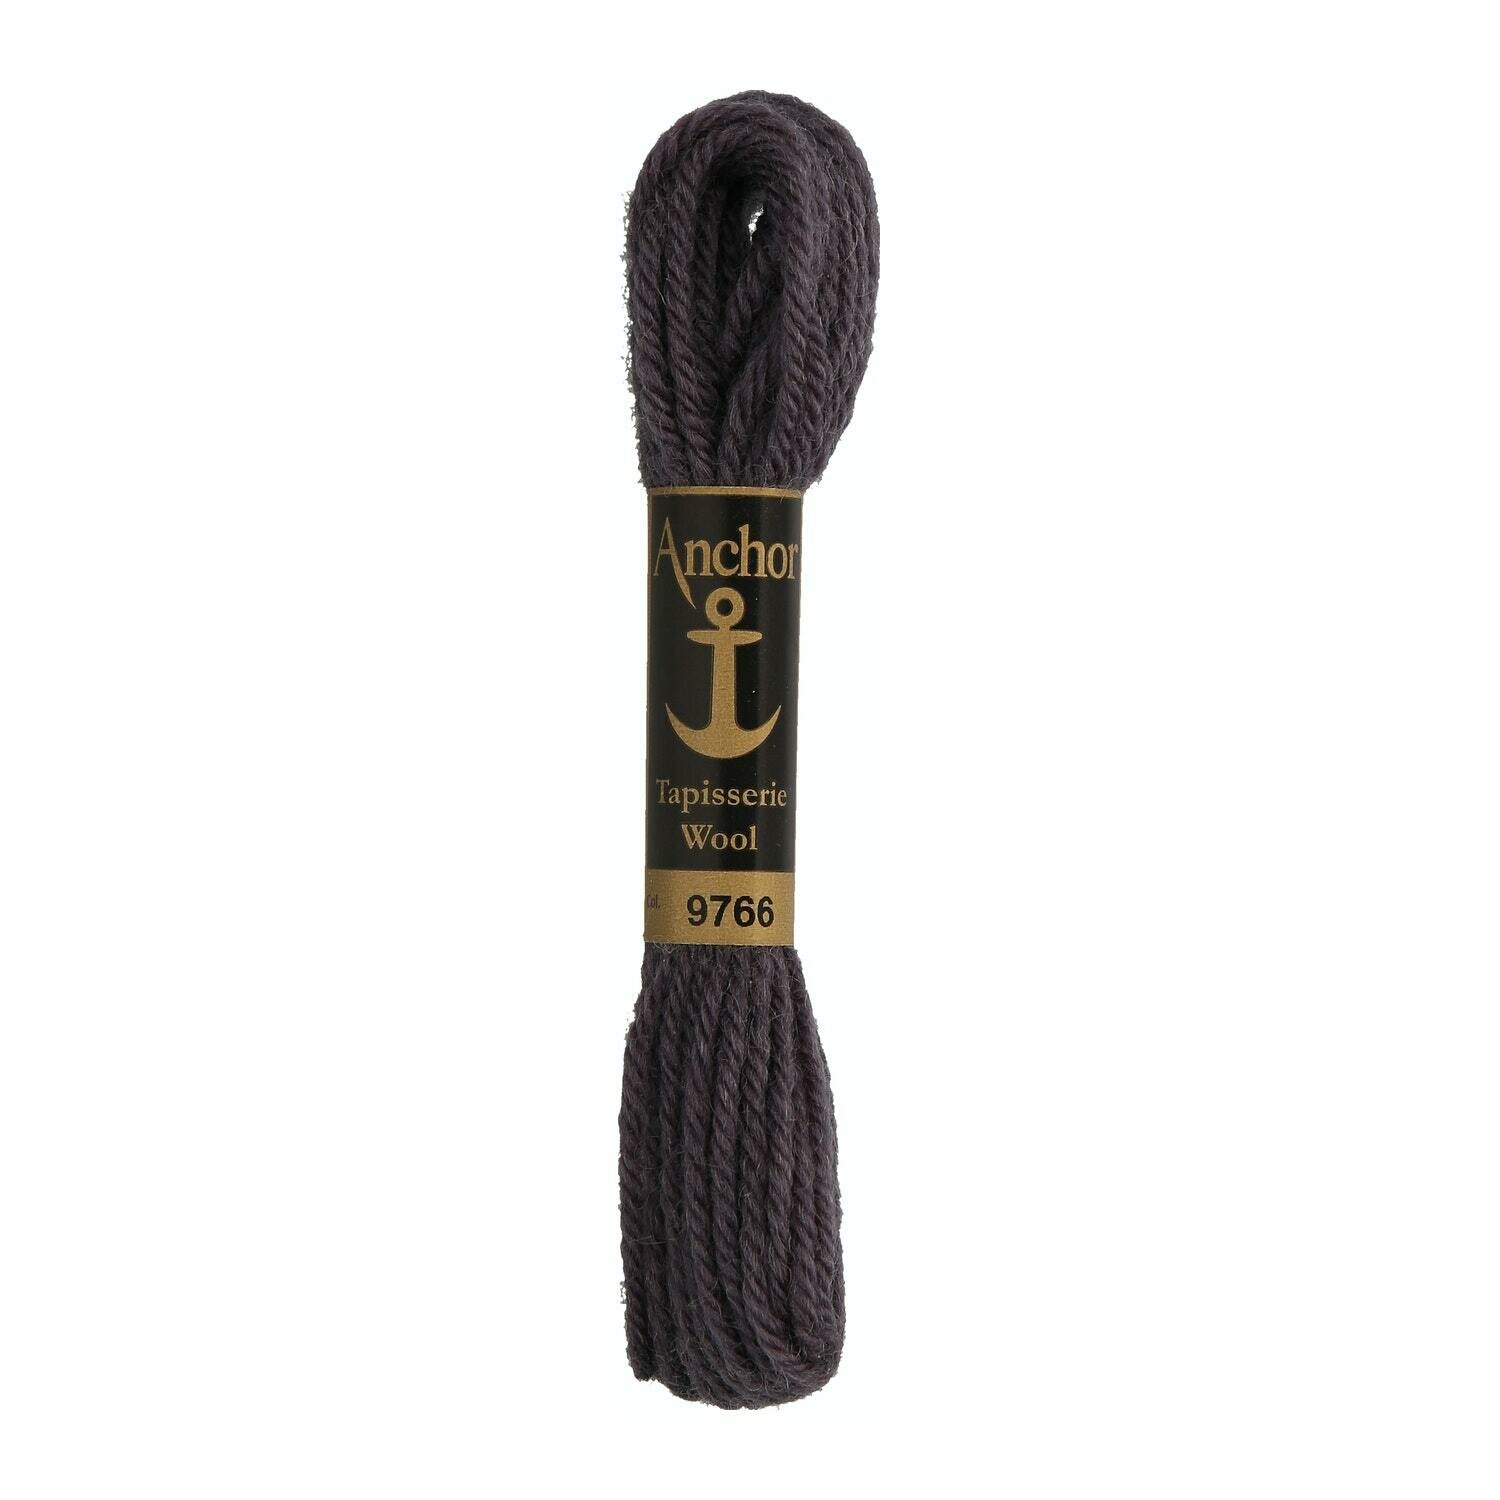 Anchor Tapisserie Wool # 09766